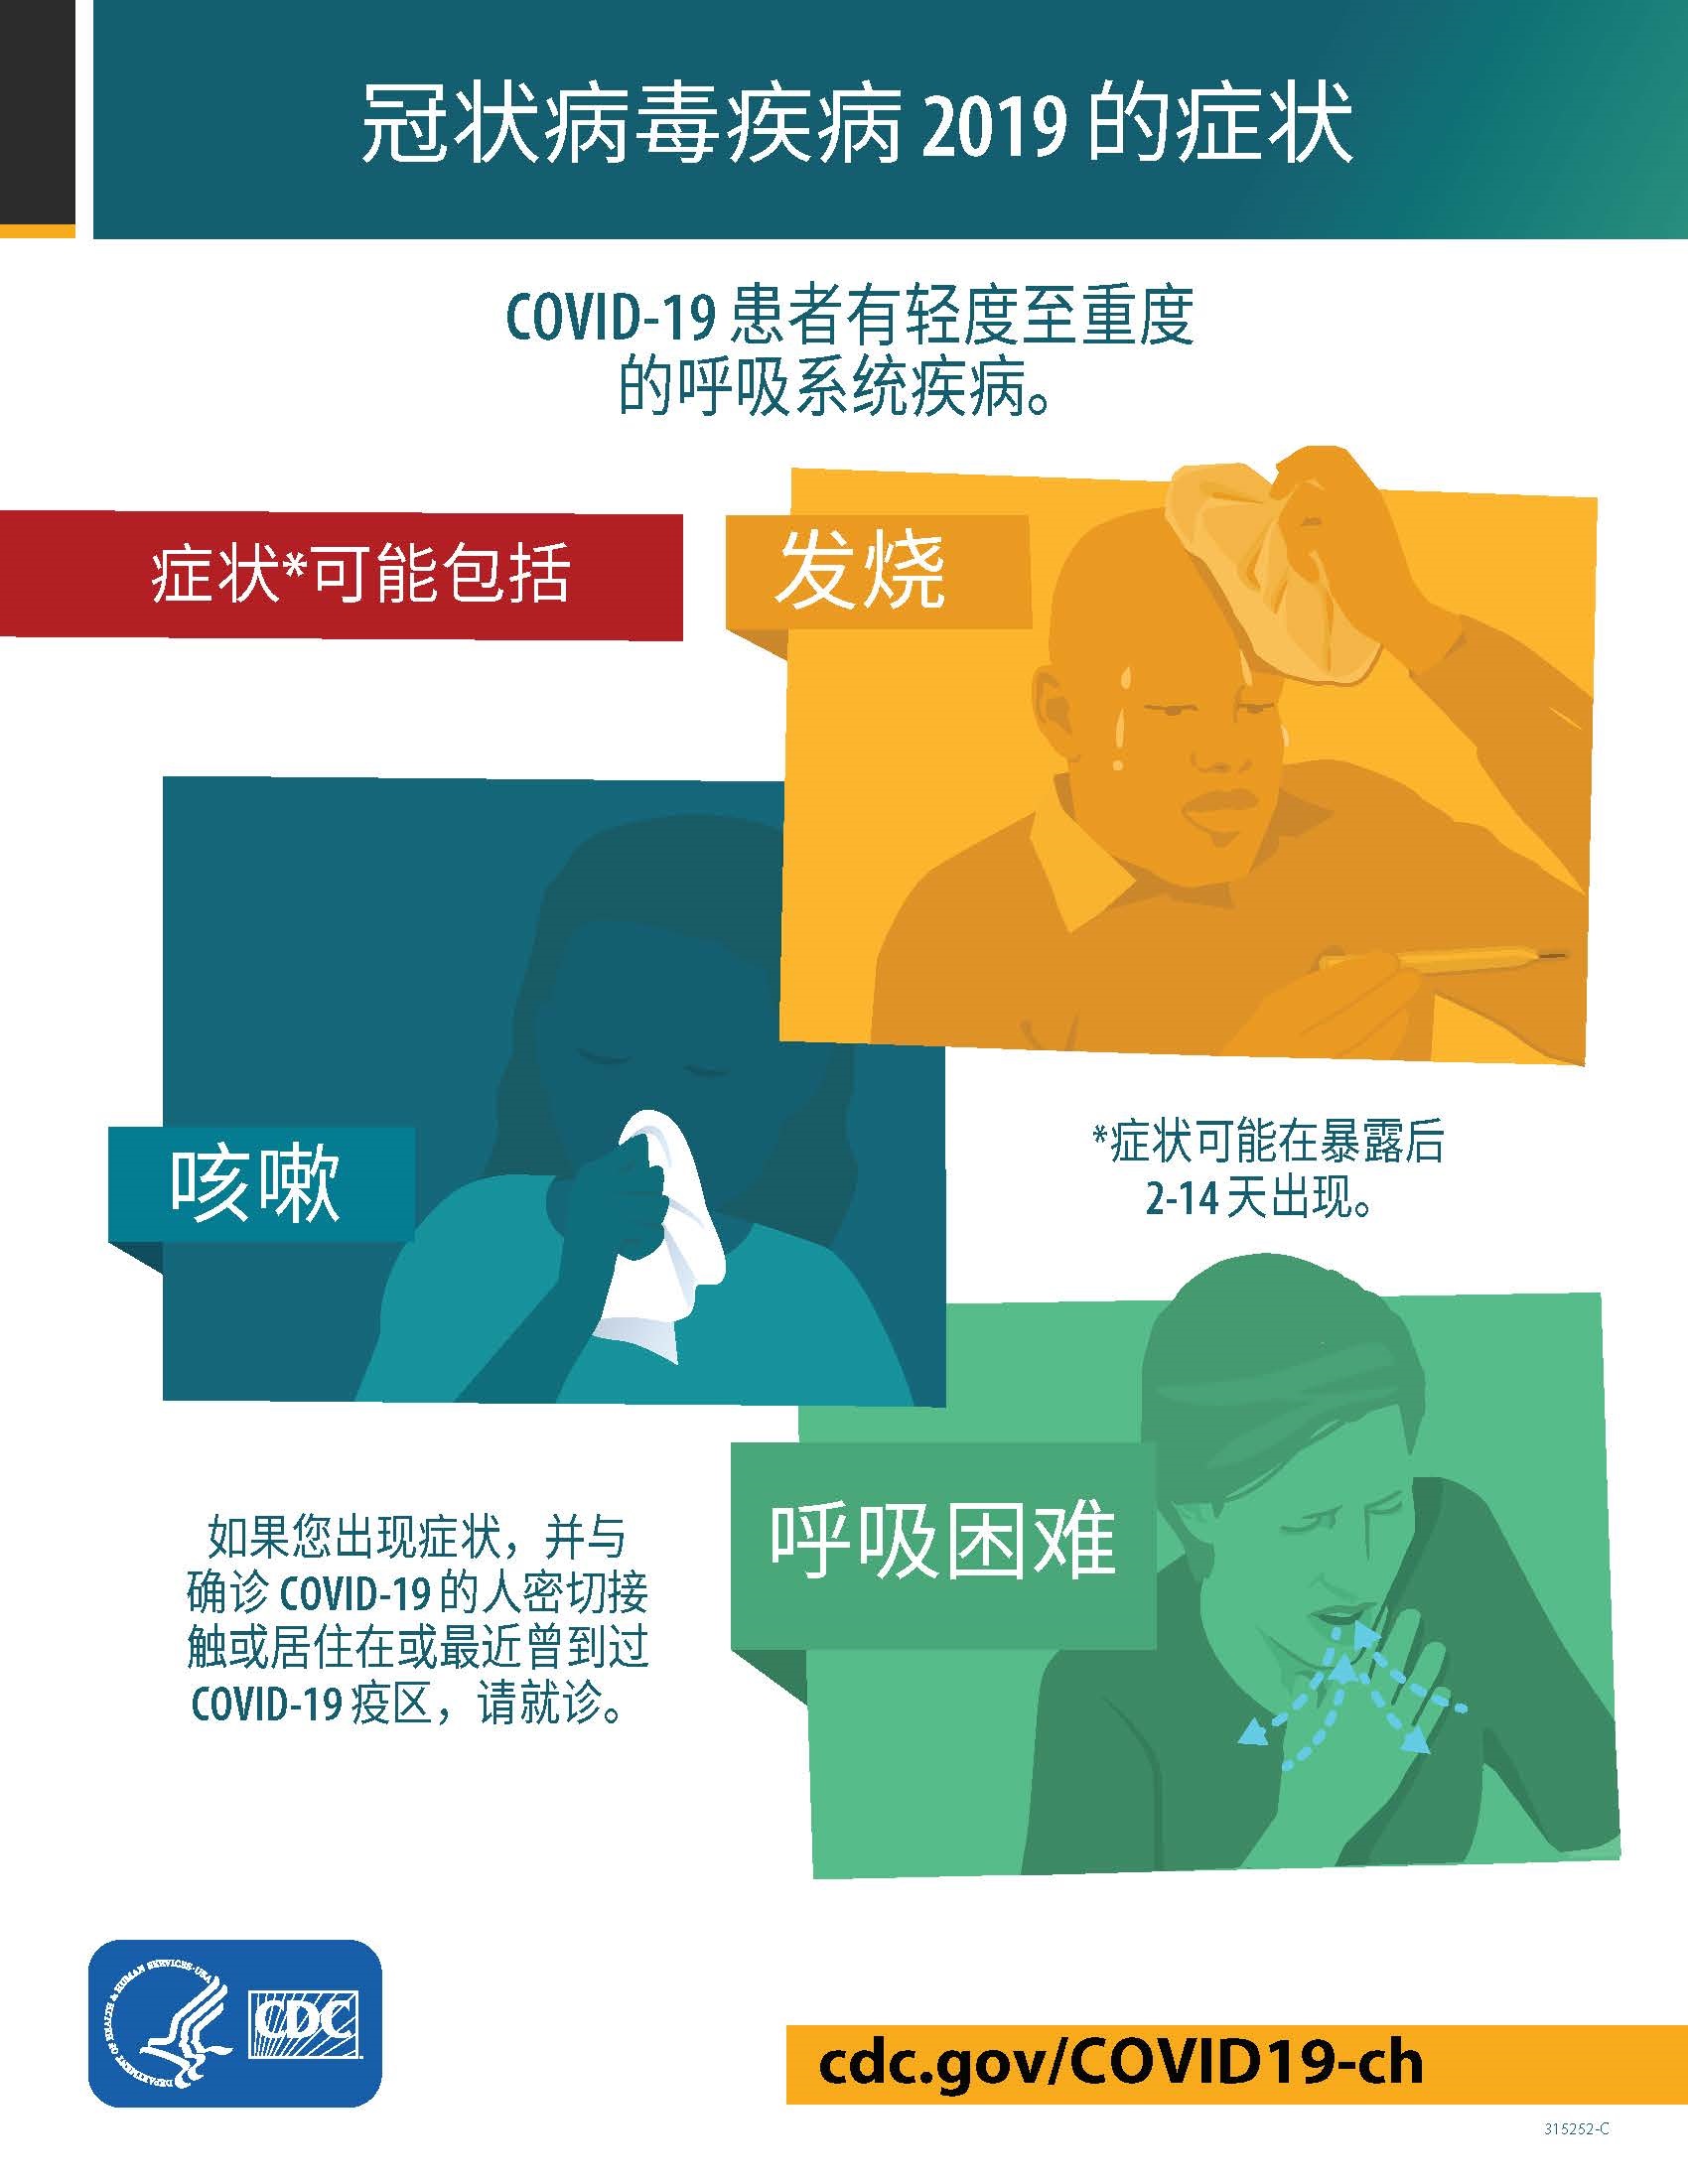 Symptoms of COVID-19 (Chinese)